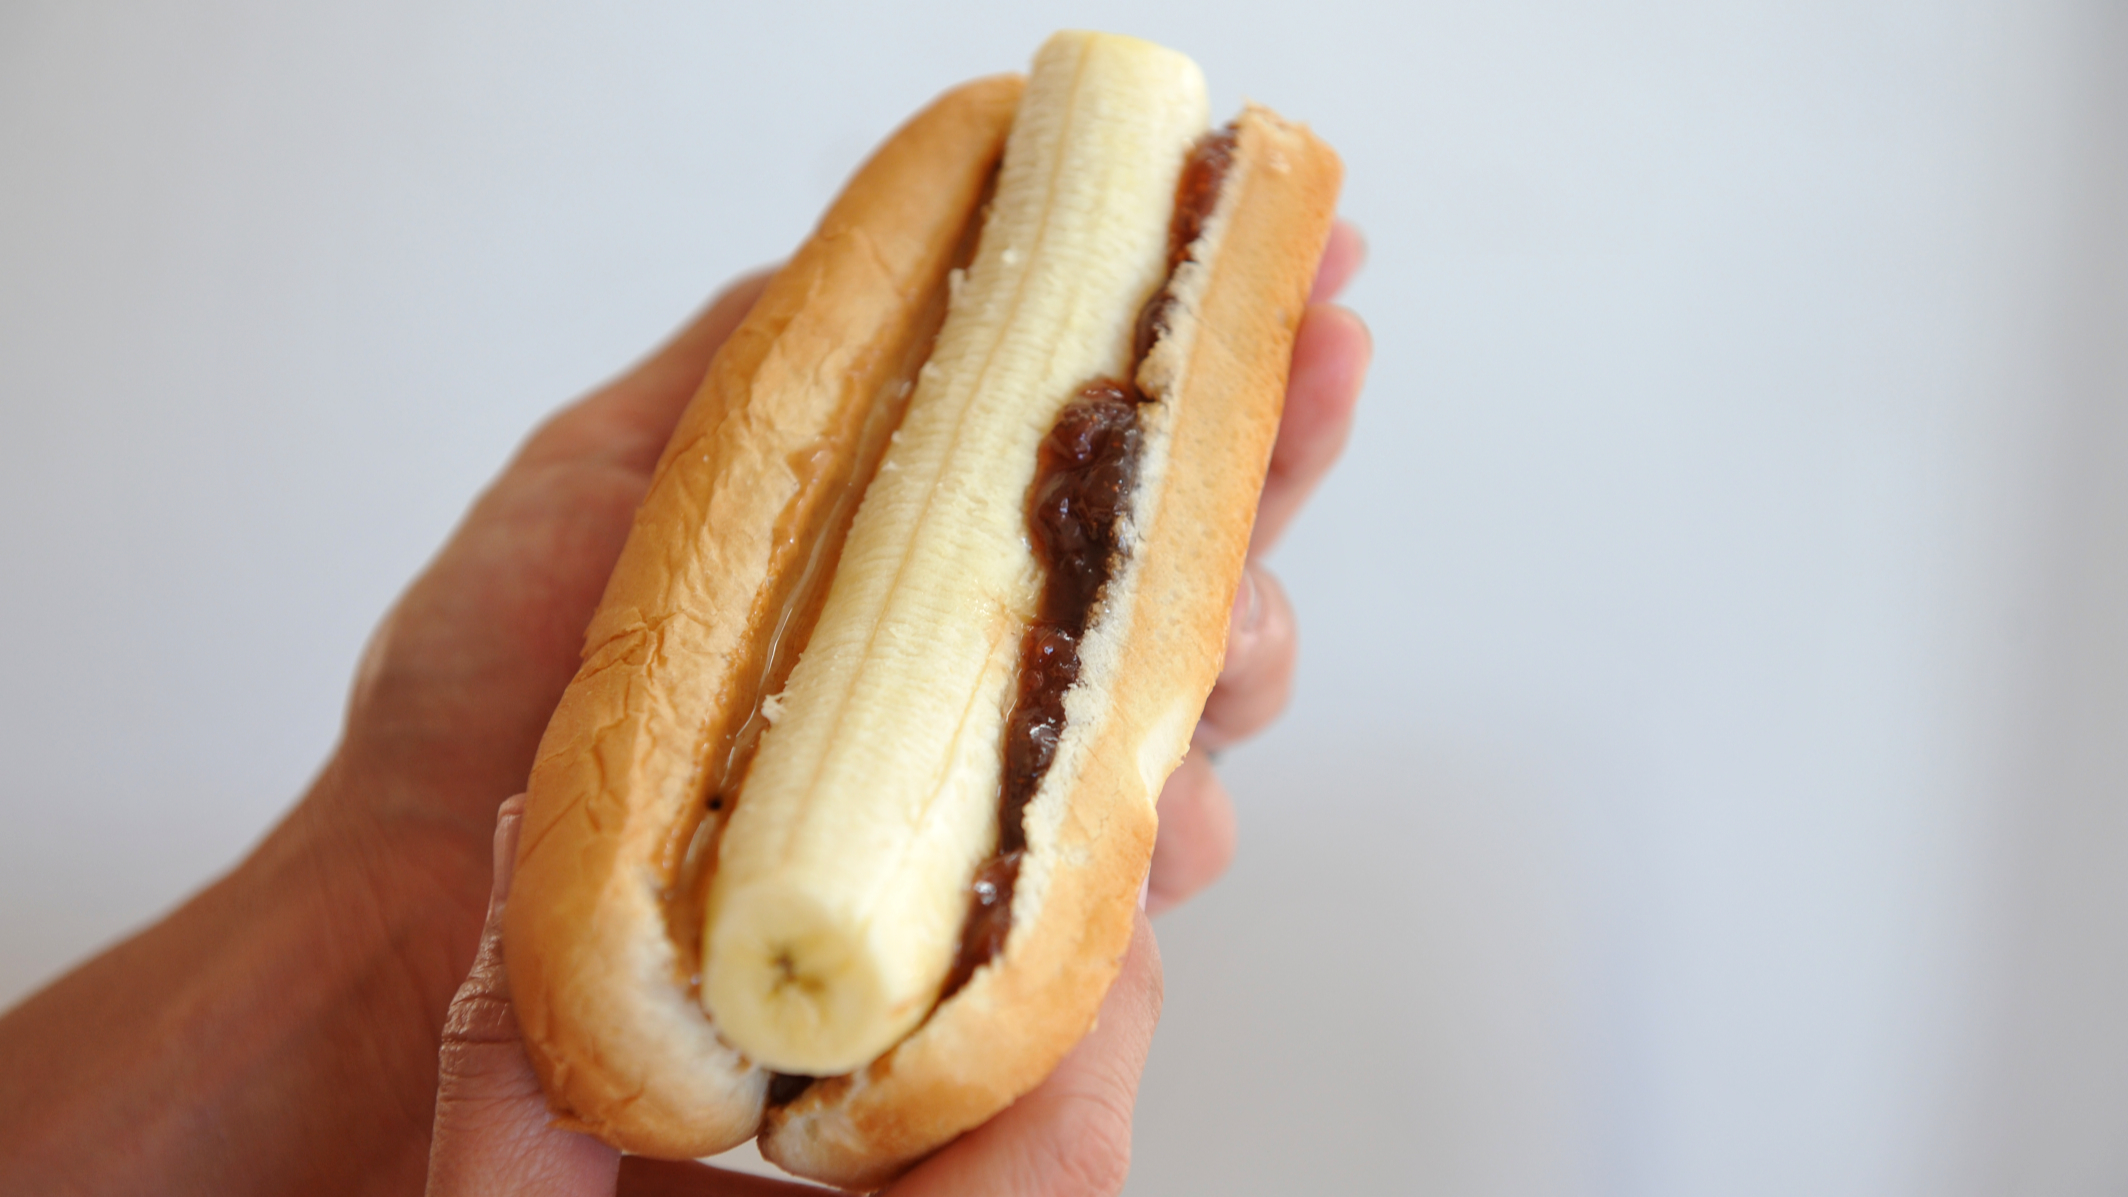 How to Make a Peanut Butter and Jelly Banana Dog: 6 Steps